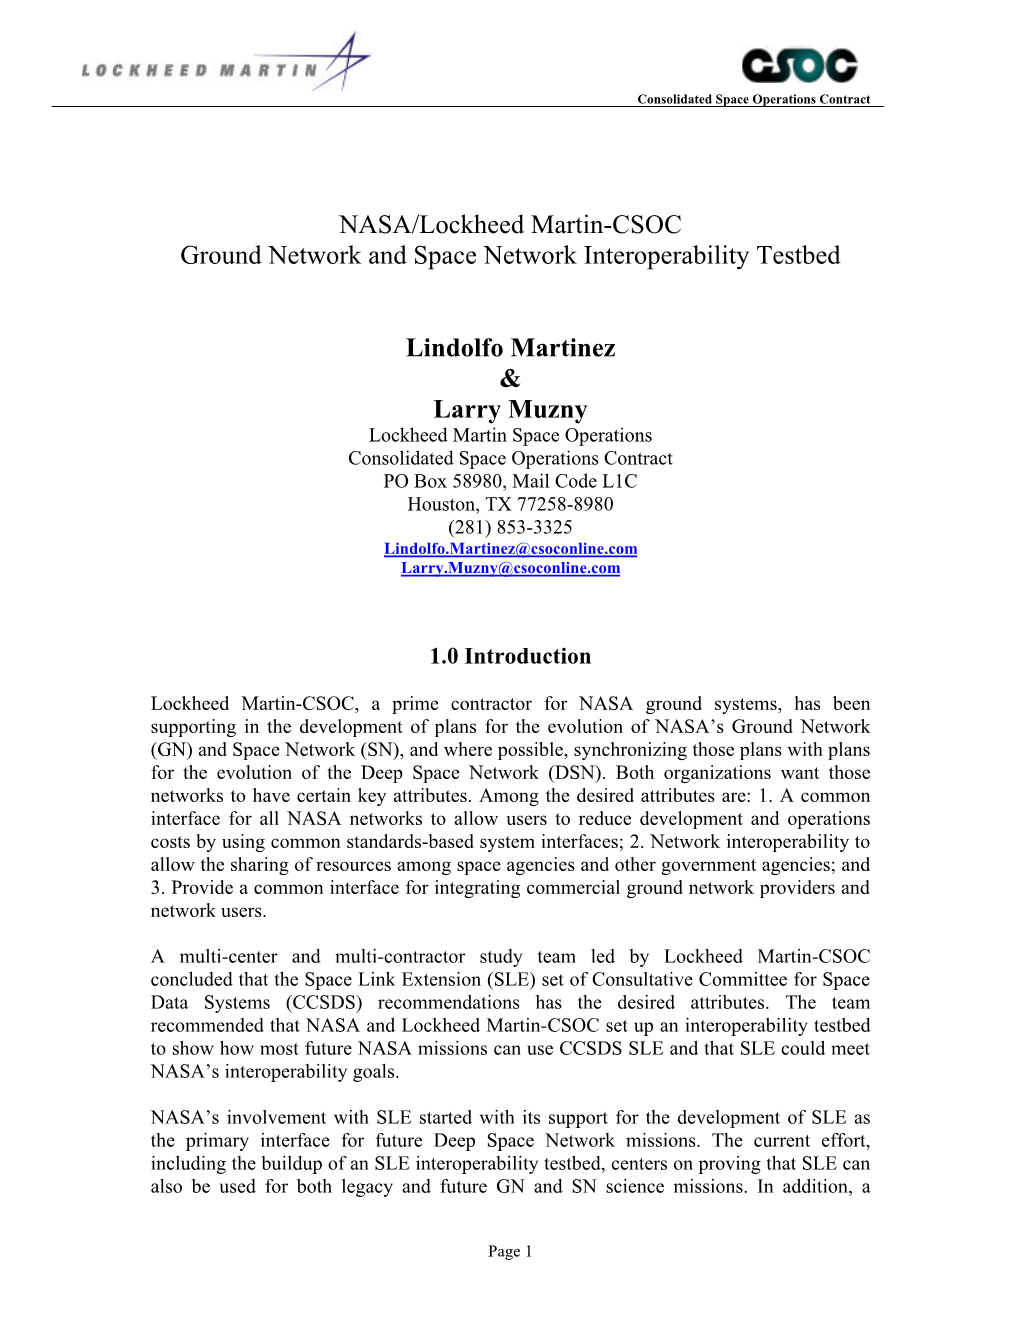 NASA-LMCSOC SN and GN Interoperability Testbed